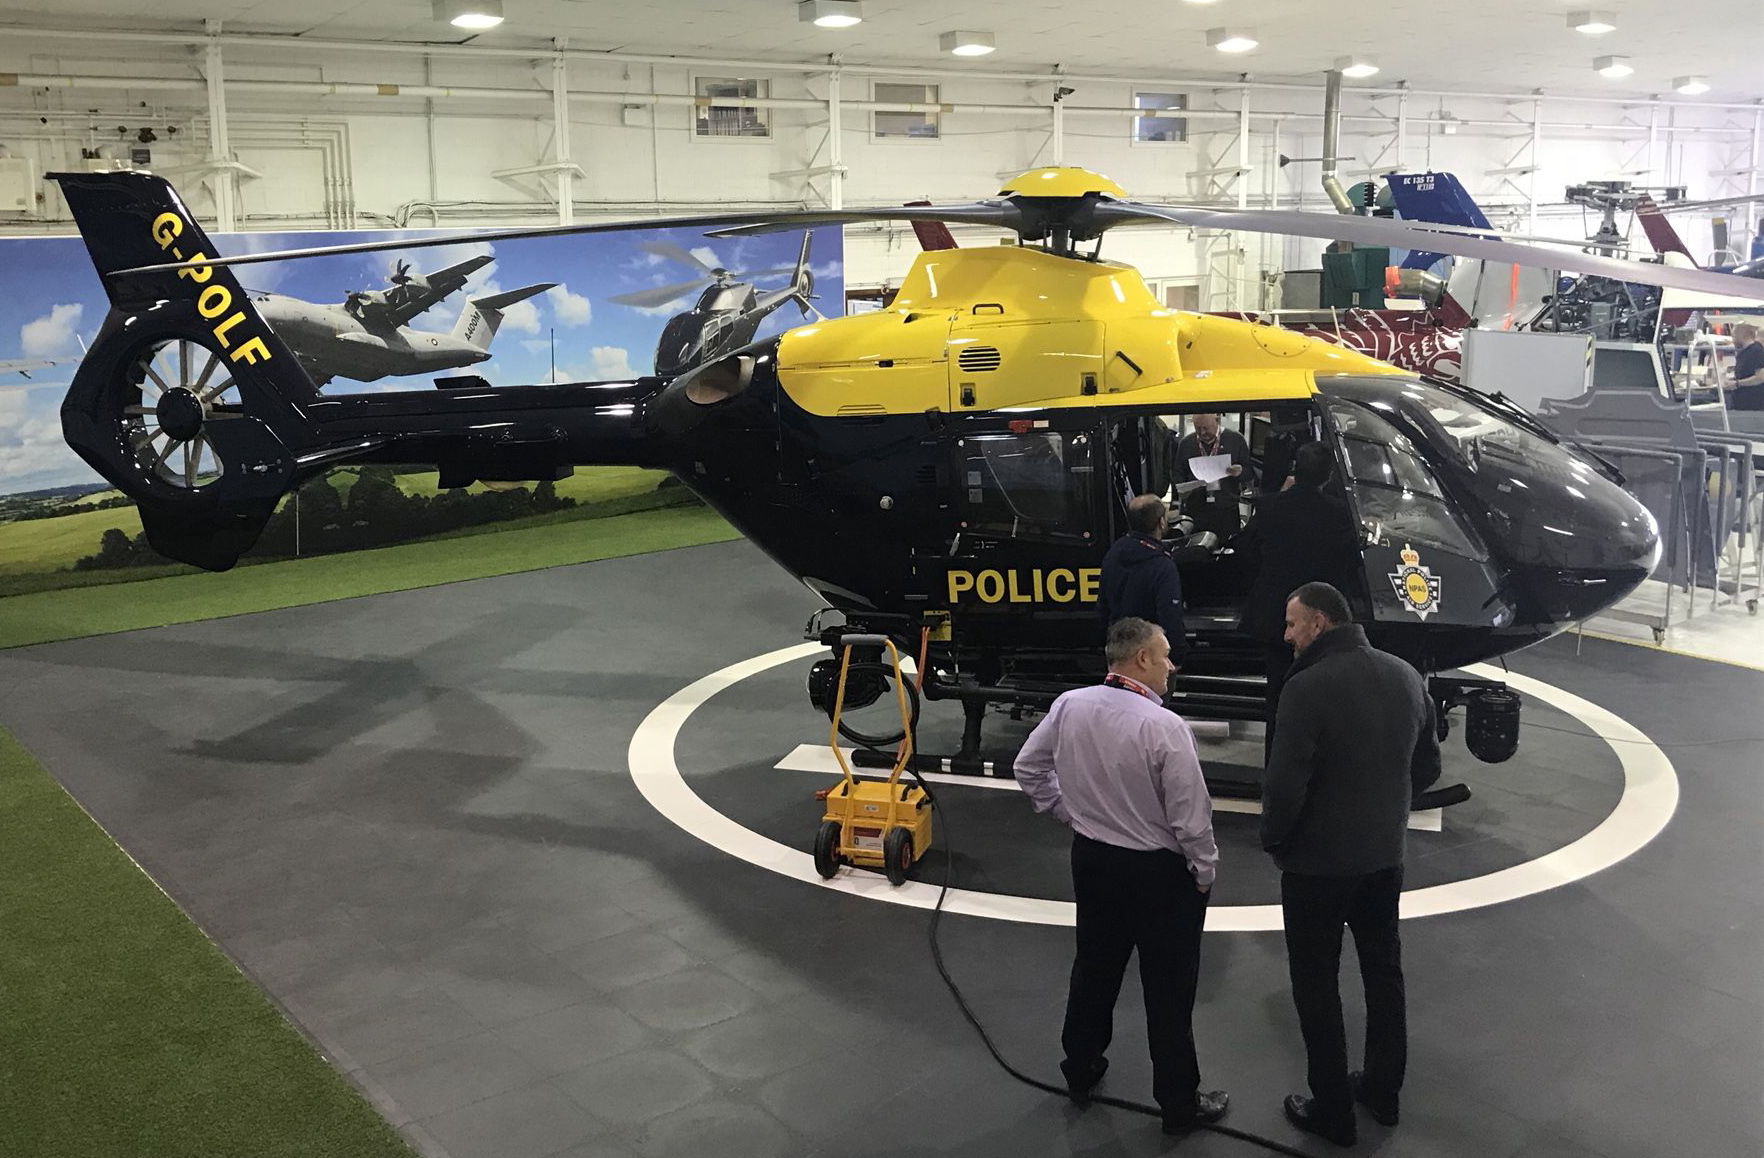 Airbus Helicopters has delivered the first of seven upgraded National Police Air Service (NPAS) H135 helicopters, under a £1.5 million contract signed in December 2017 to equip and standardise the UK police helicopter fleet’s Night Vision (NVIS) capability. Click to enlarge.